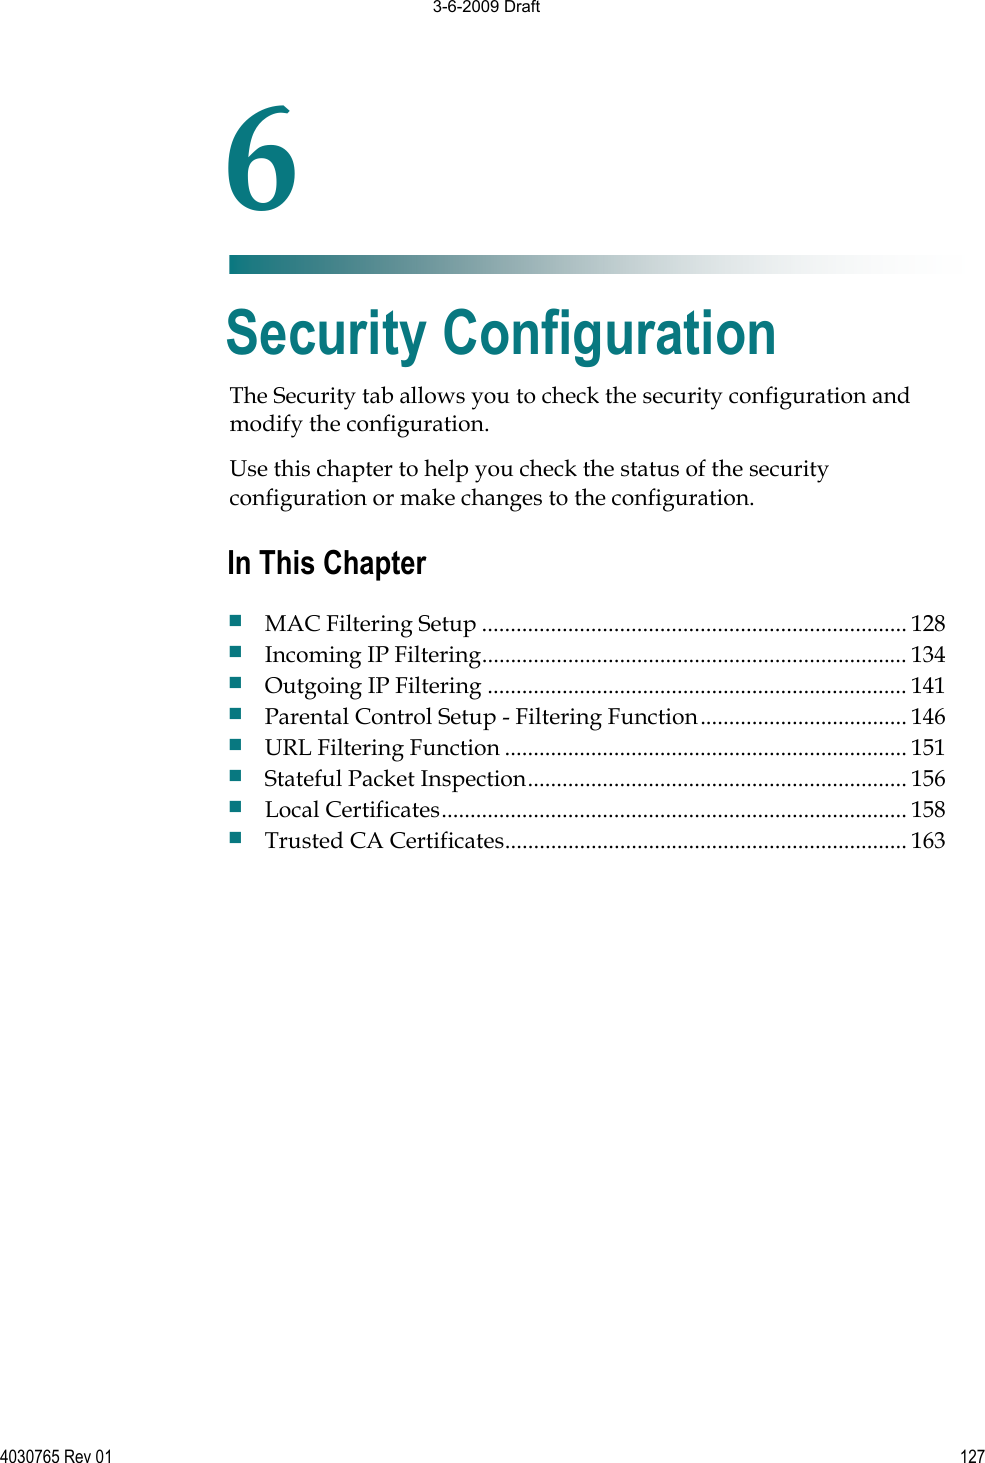 4030765 Rev 01 127The Security tab allows you to check the security configuration and modify the configuration.Use this chapter to help you check the status of the security configuration or make changes to the configuration. 6Chapter 6Security Configuration In This Chapter MAC Filtering Setup .......................................................................... 128 Incoming IP Filtering.......................................................................... 134 Outgoing IP Filtering ......................................................................... 141 Parental Control Setup - Filtering Function.................................... 146 URL Filtering Function ...................................................................... 151 Stateful Packet Inspection.................................................................. 156 Local Certificates................................................................................. 158 Trusted CA Certificates...................................................................... 163 3-6-2009 Draft